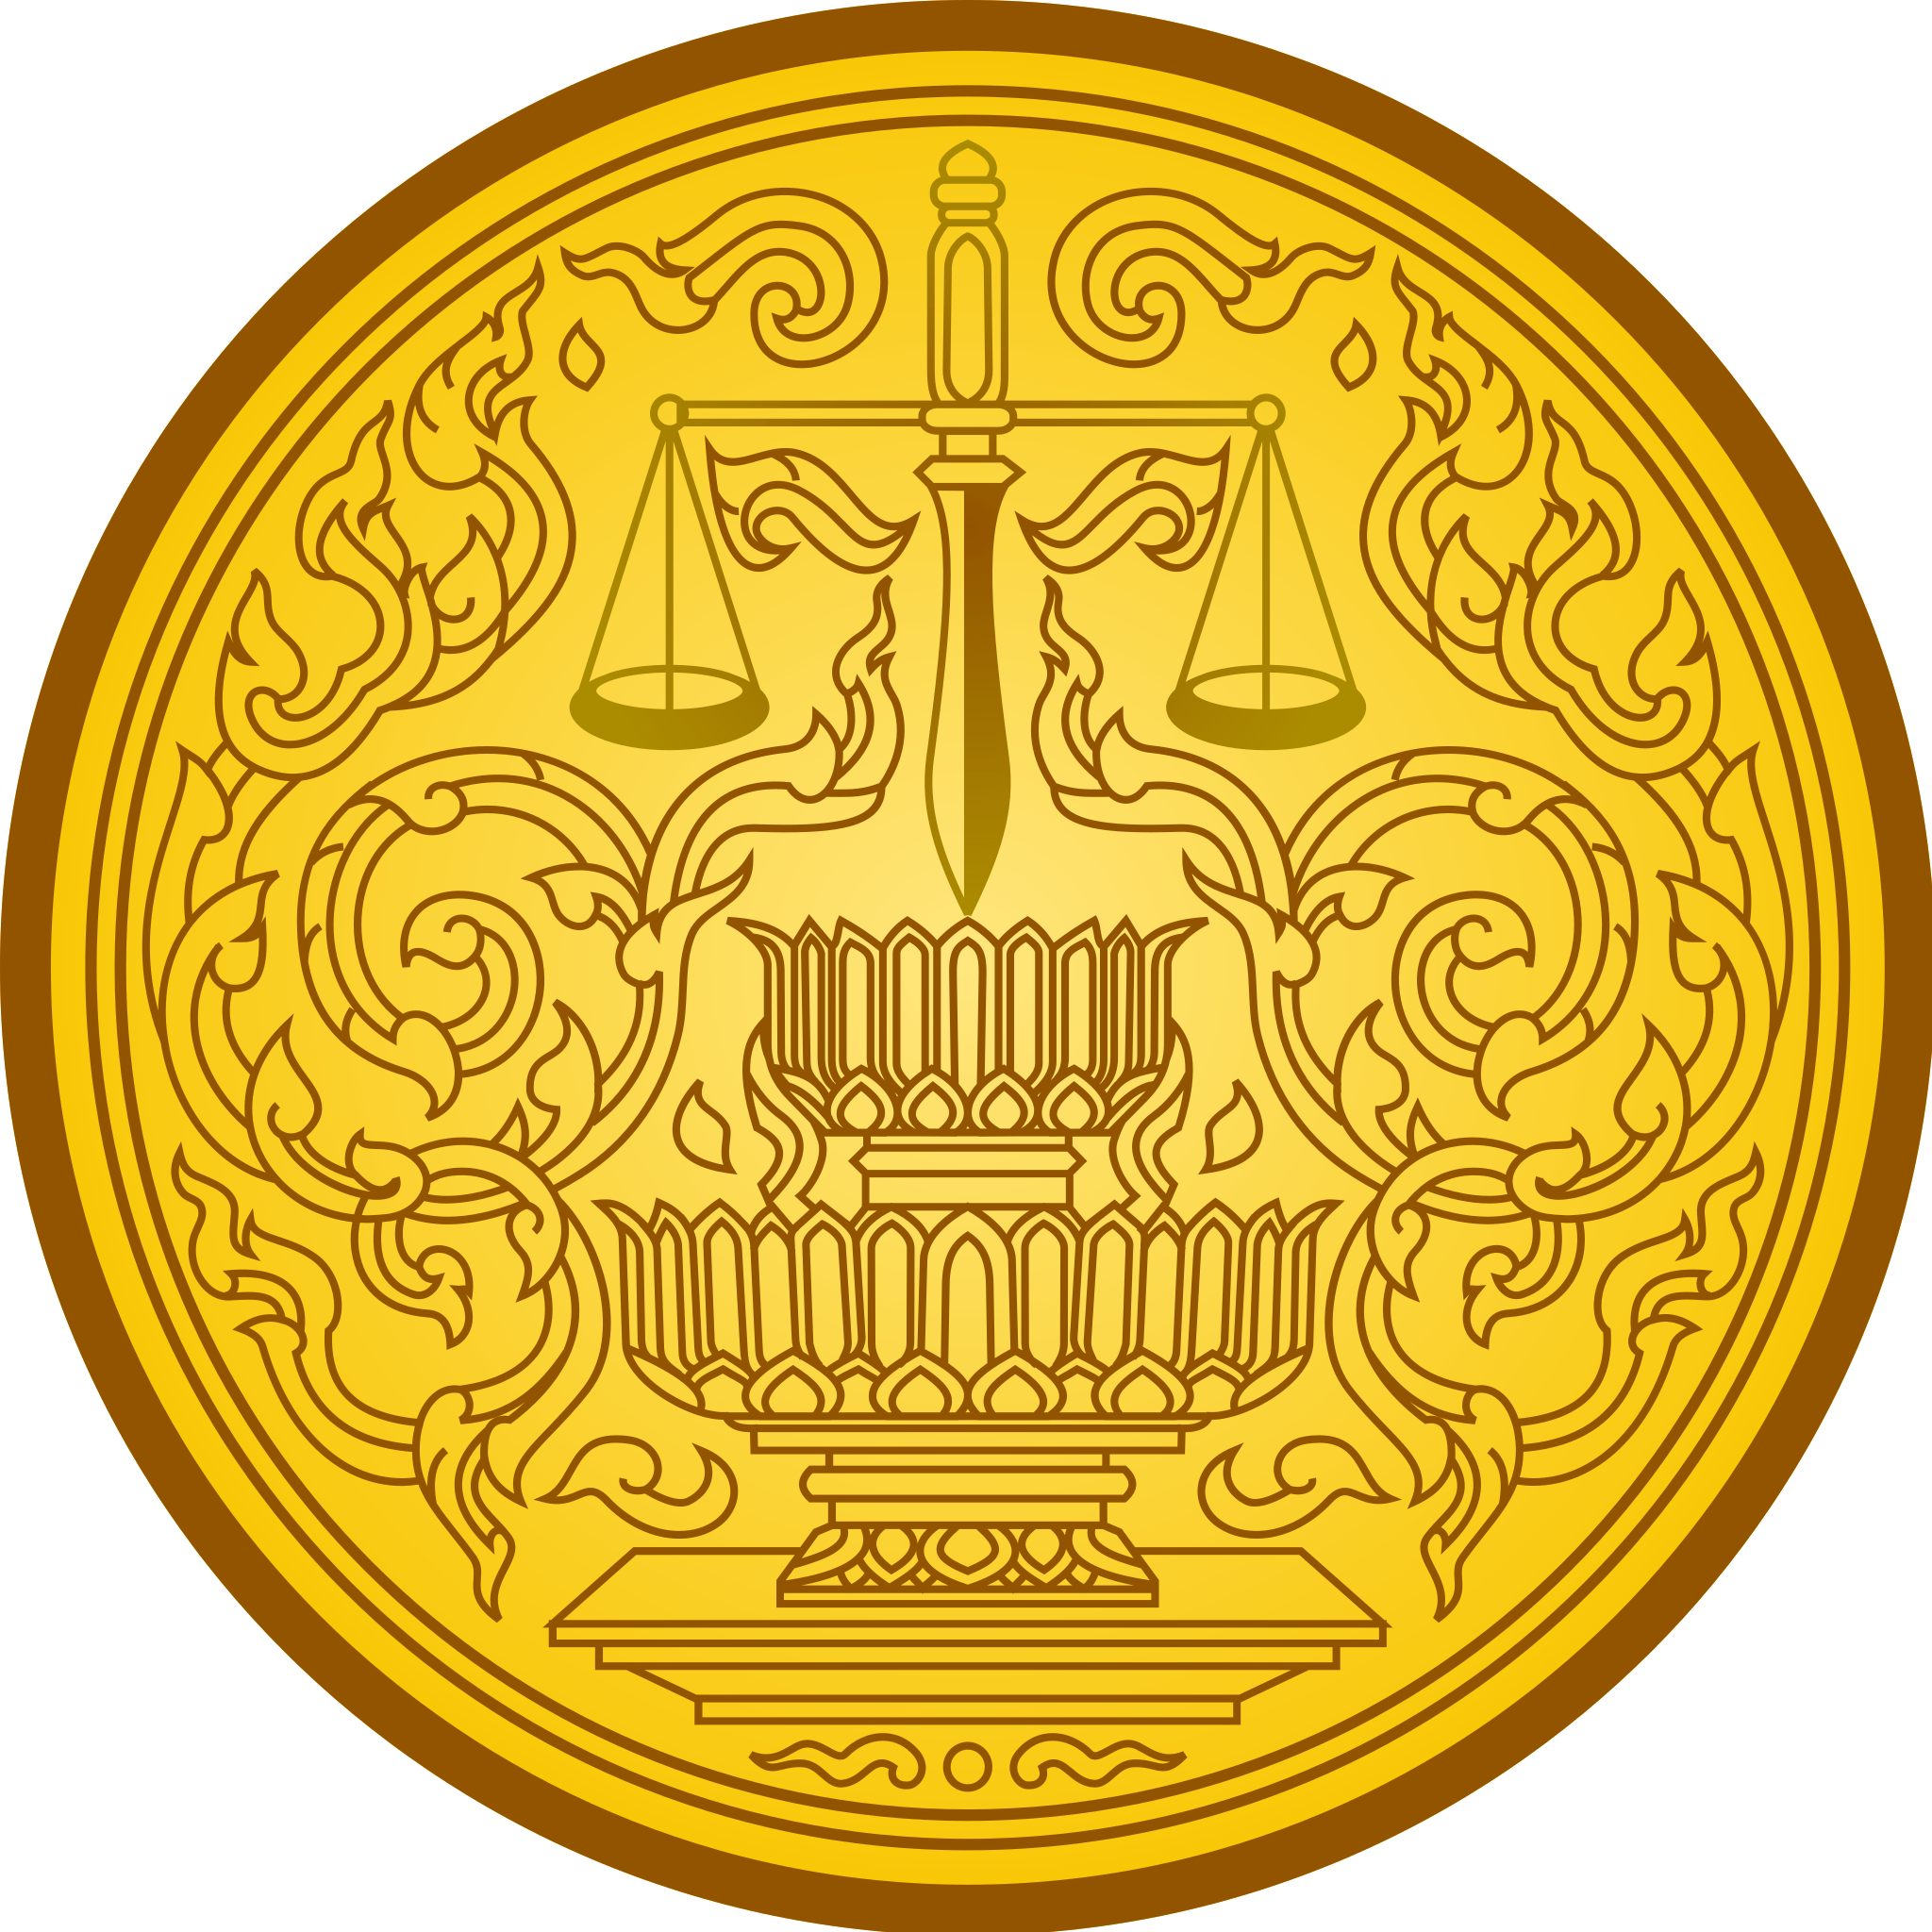 2048px-Seal_of_the_Ministry_of_Justice_of_Thailand.svg.png